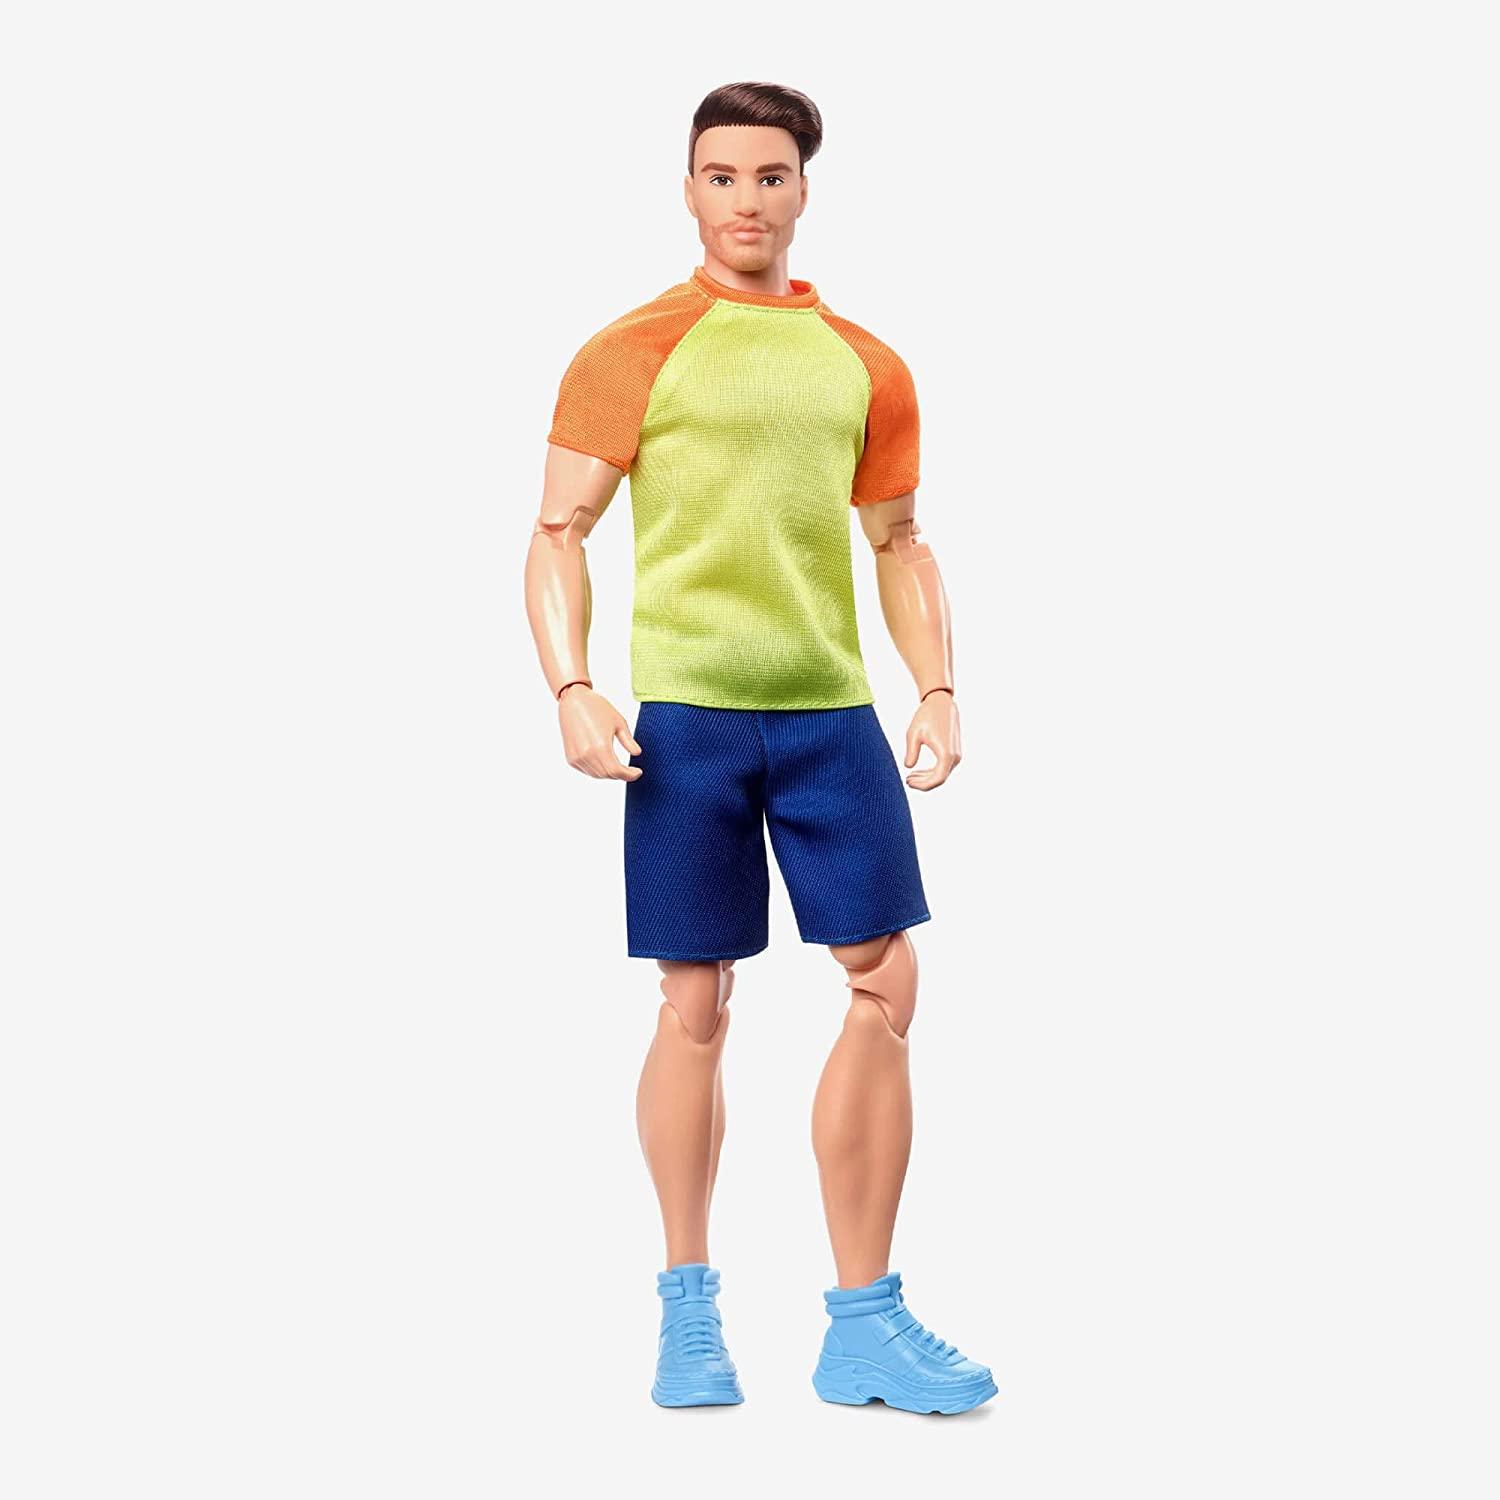 Ken Doll, Barbie Looks, Brown Hair with Beard, Color Block Tee & Blue Shorts, Light Blue Sneakers, Style and Pose, Fashion Collectibles Pre Order